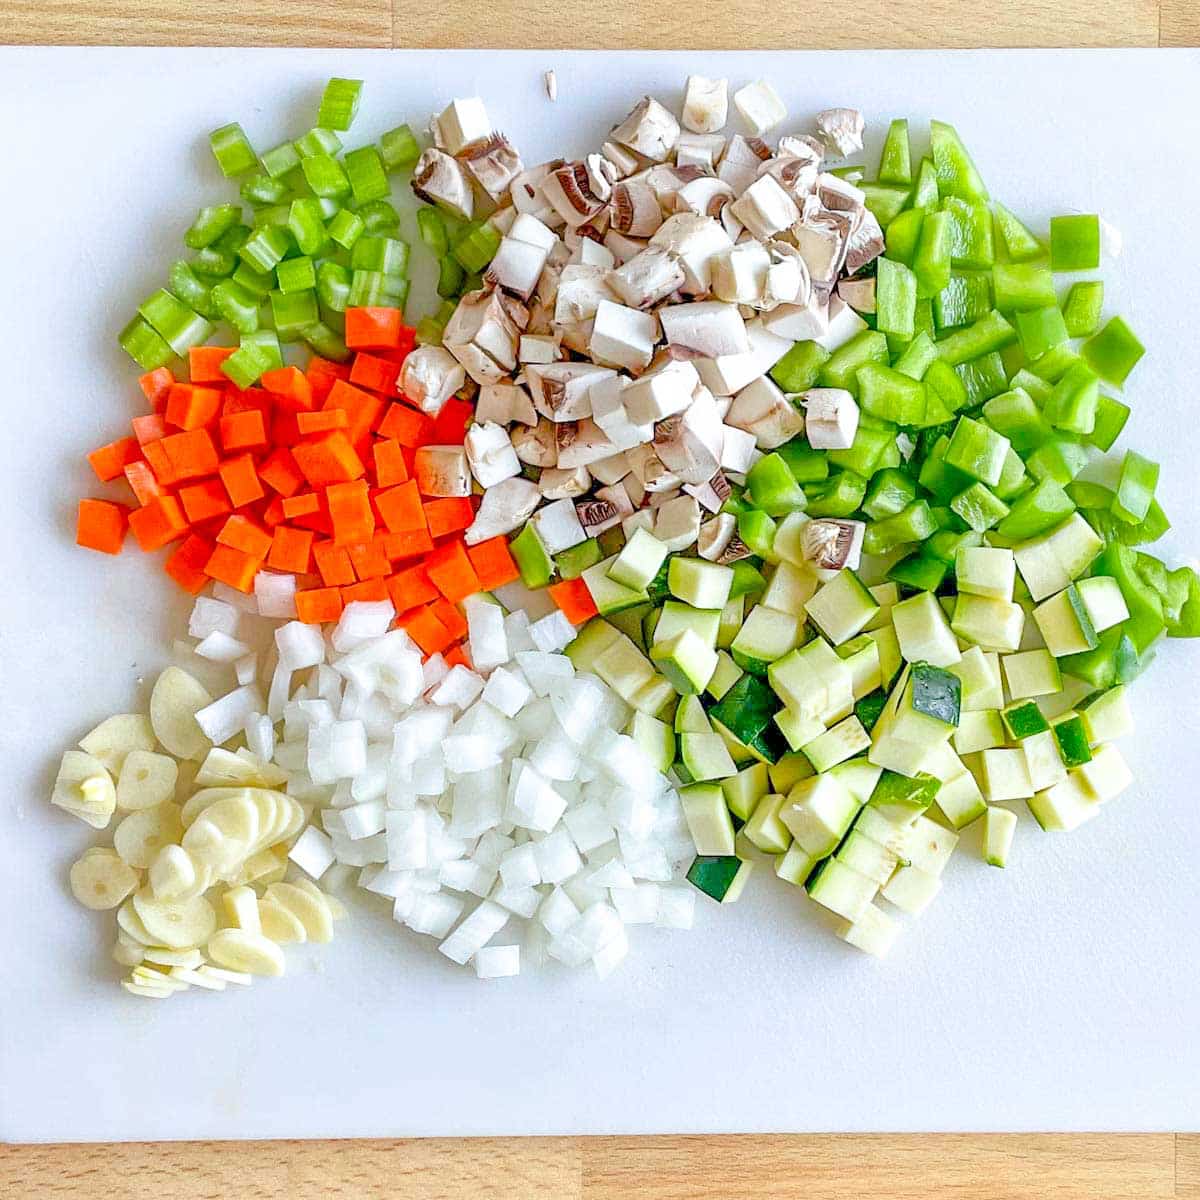 Diced carrot, celery, mushrooms, green bell pepper, zucchini, onion, and sliced garlic sit on a white cutting board.